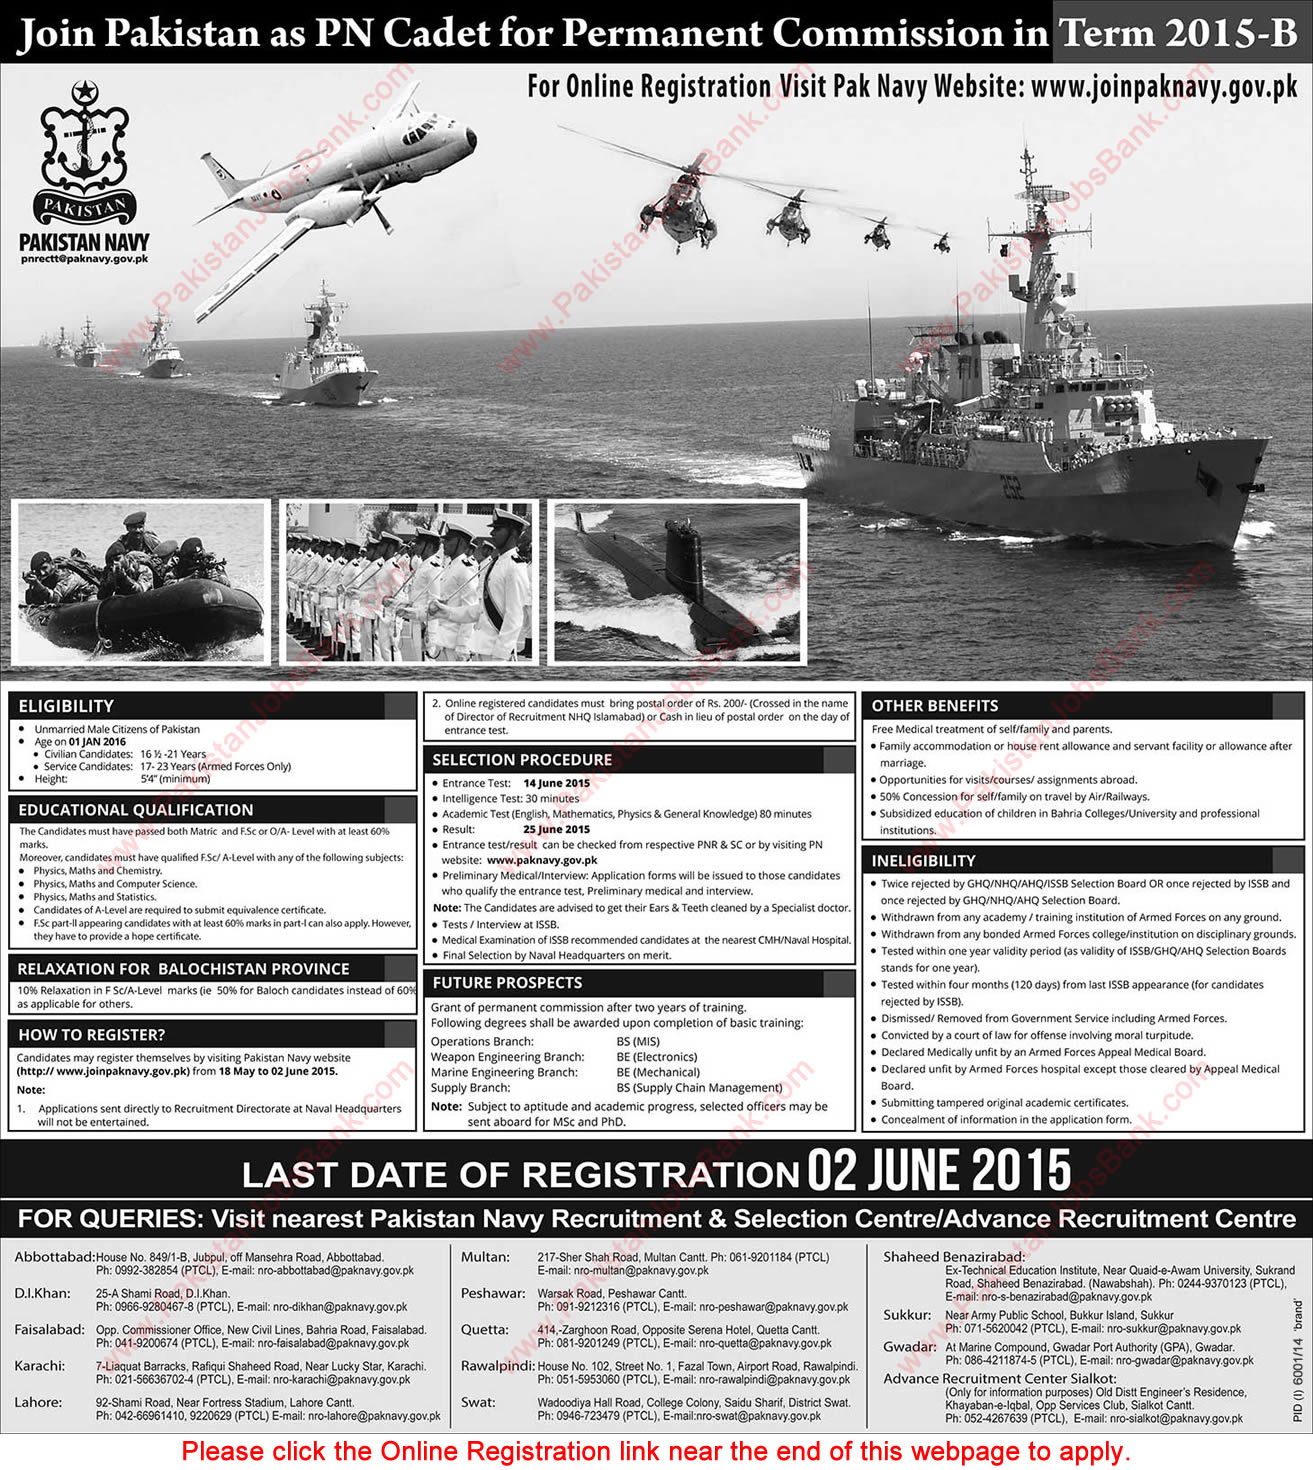 Join Pakistan Navy May 2015 Online Registration PN Cadet Permanent Commission Term 2015-B Jobs